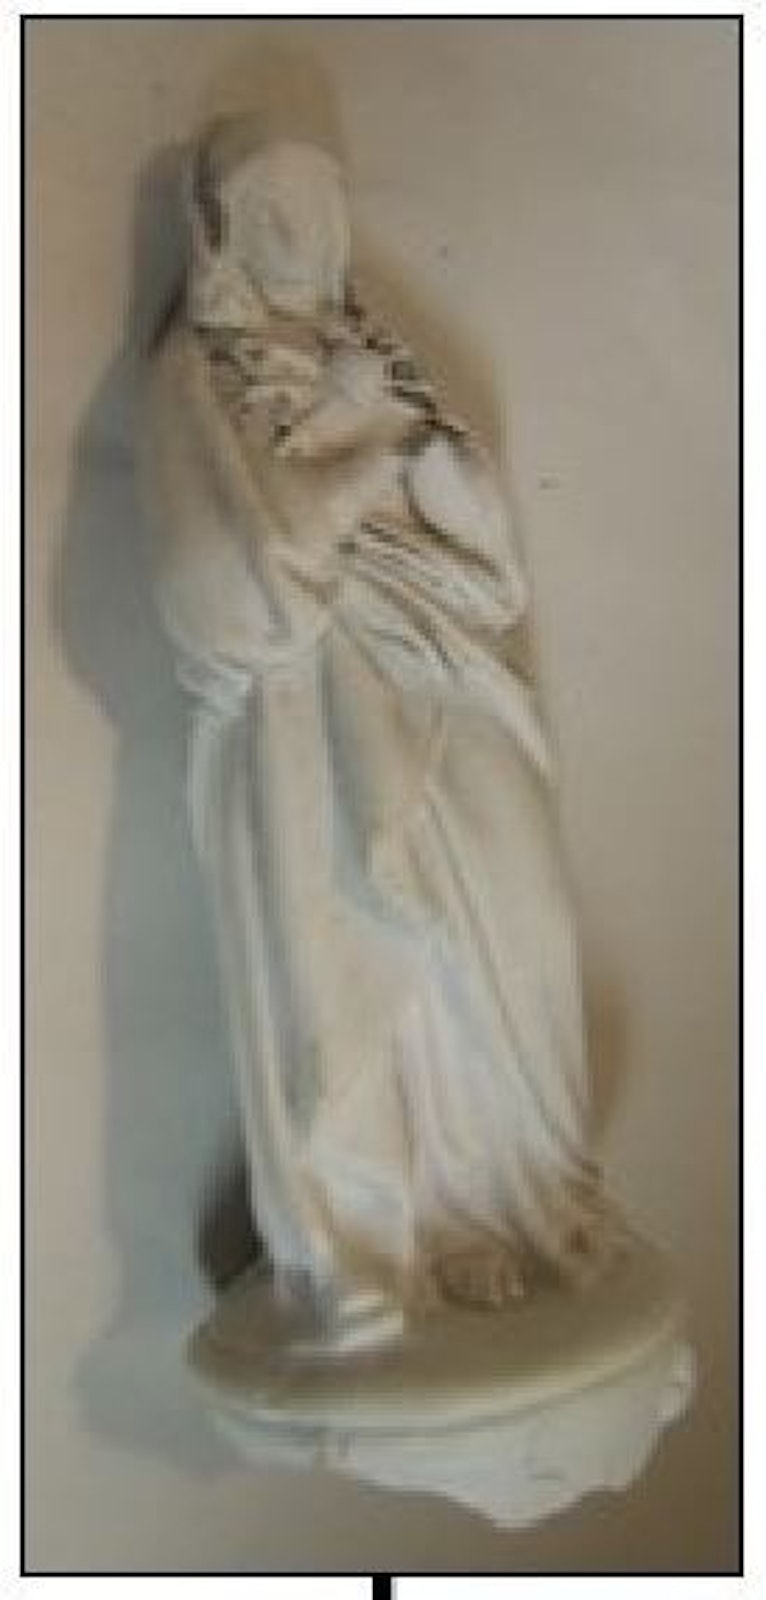 A 9-inch alabaster statue of Our Lady of Sorrows that was discovered by a girl in Lake St. Clair in 1962. The discovery of the statue was a key clue in narrowing down the location of St. Felicity. (Courtesy of Macomb County)